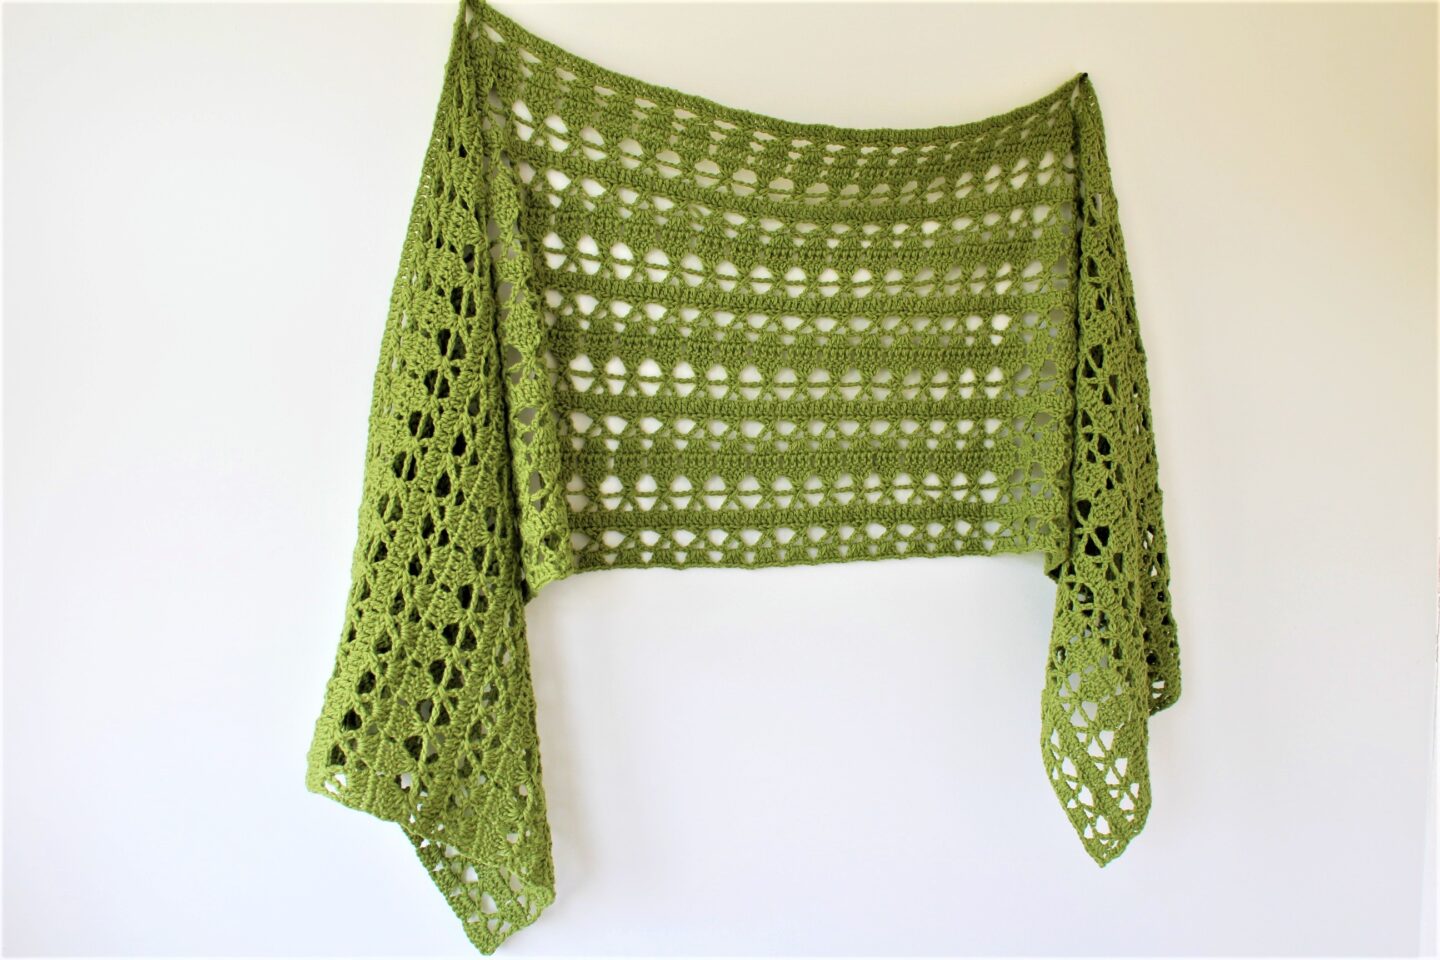 Different angle of the Harlyn shawl